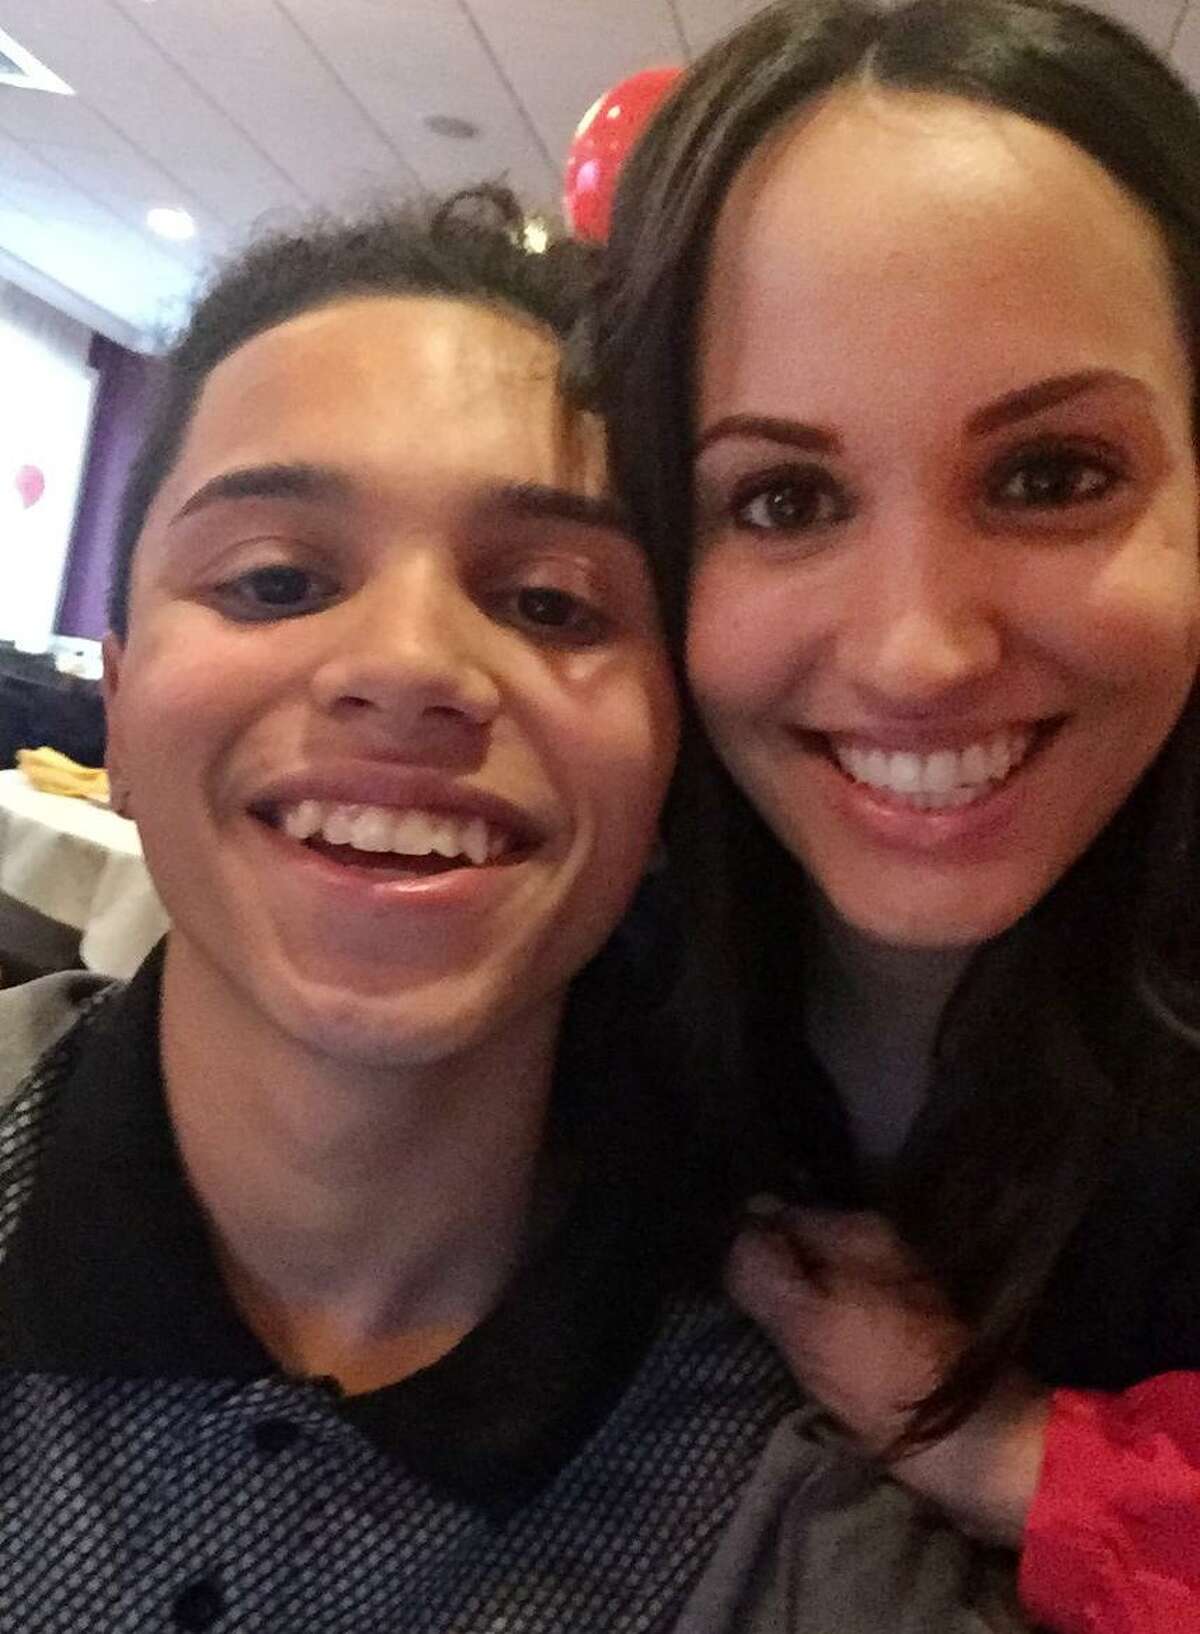 15-year-old Jayson Negron with cousin Cheryl Green. Relatives have identified Negron, of Bridgeport, as the teen shot dead by police on Tuesday.